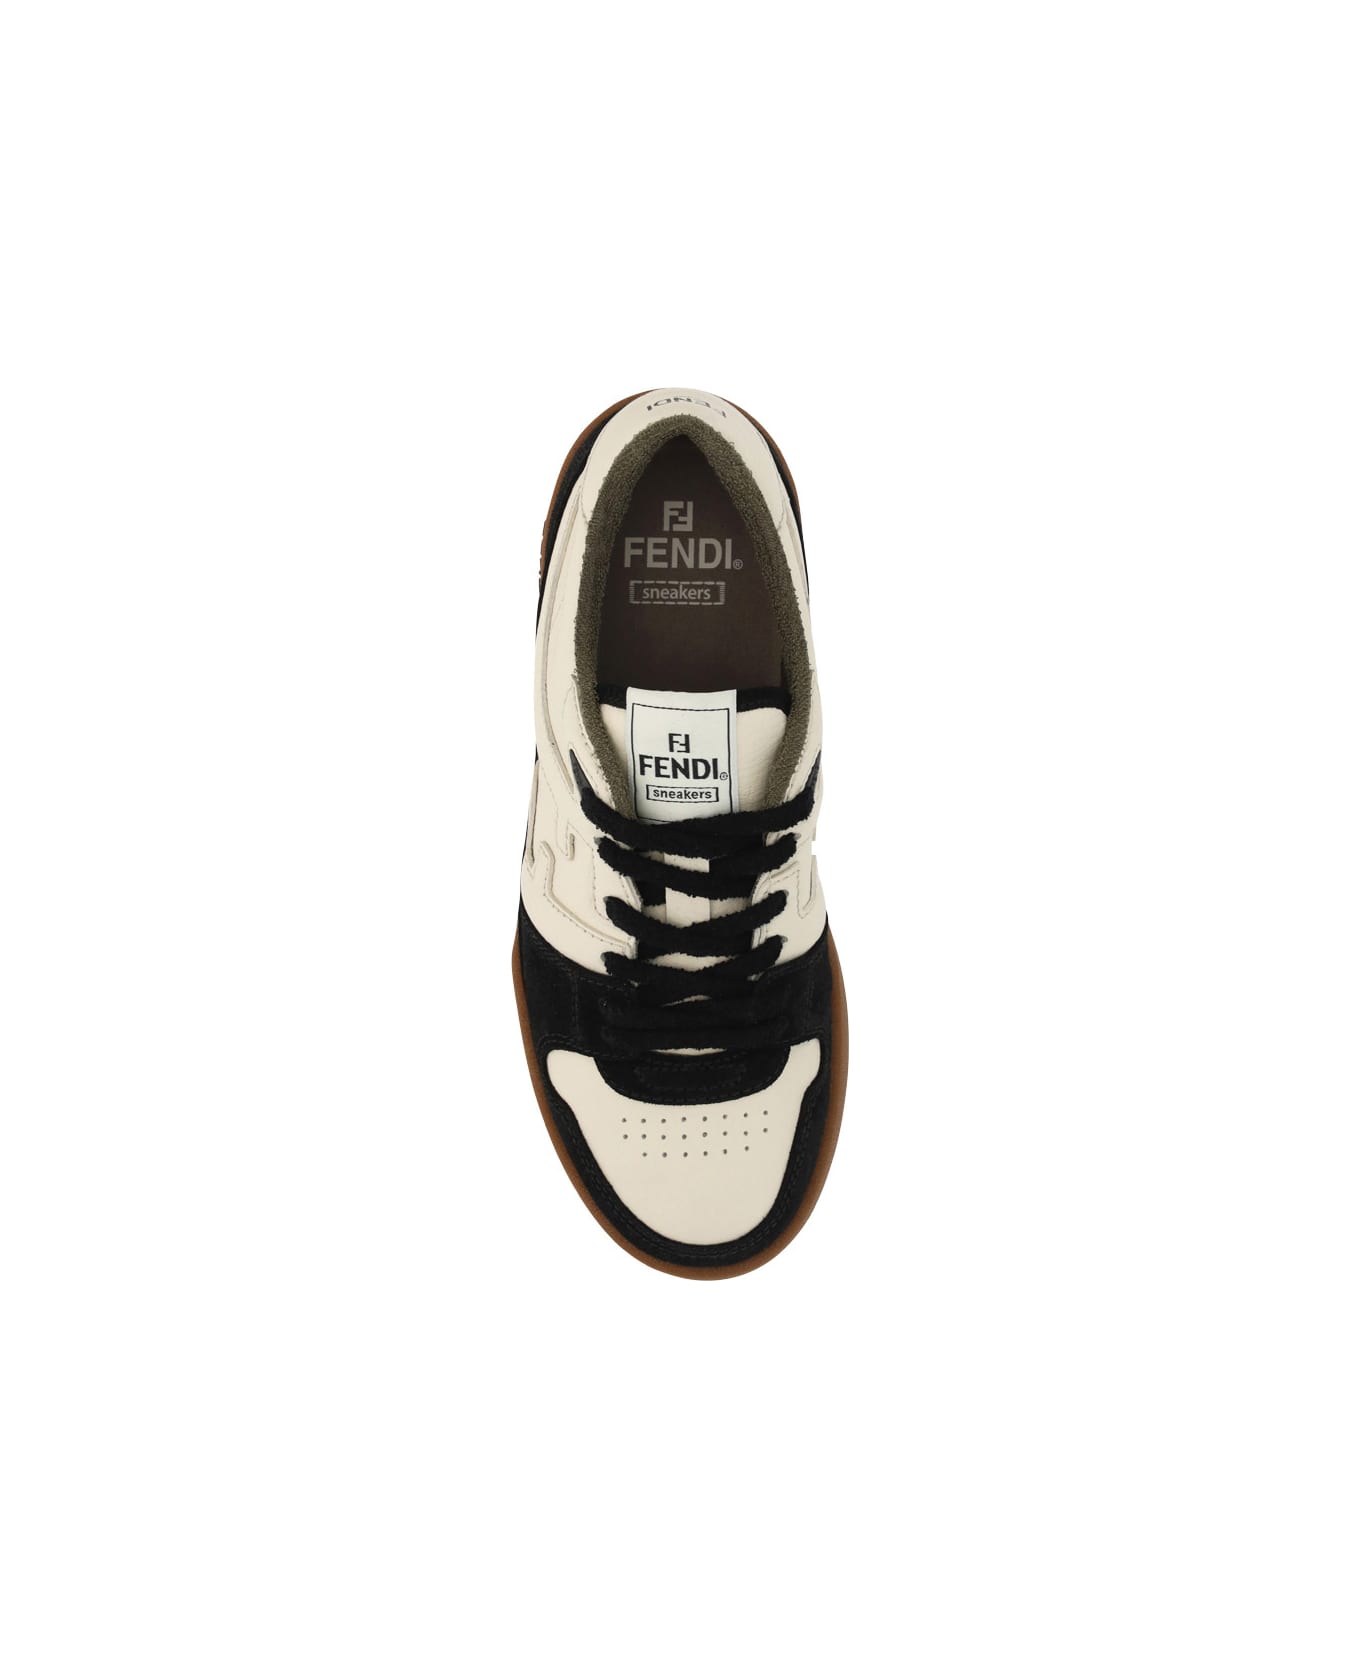 Fendi Match Sneakers In Leather With Suede Inserts - Nero+milk+nero